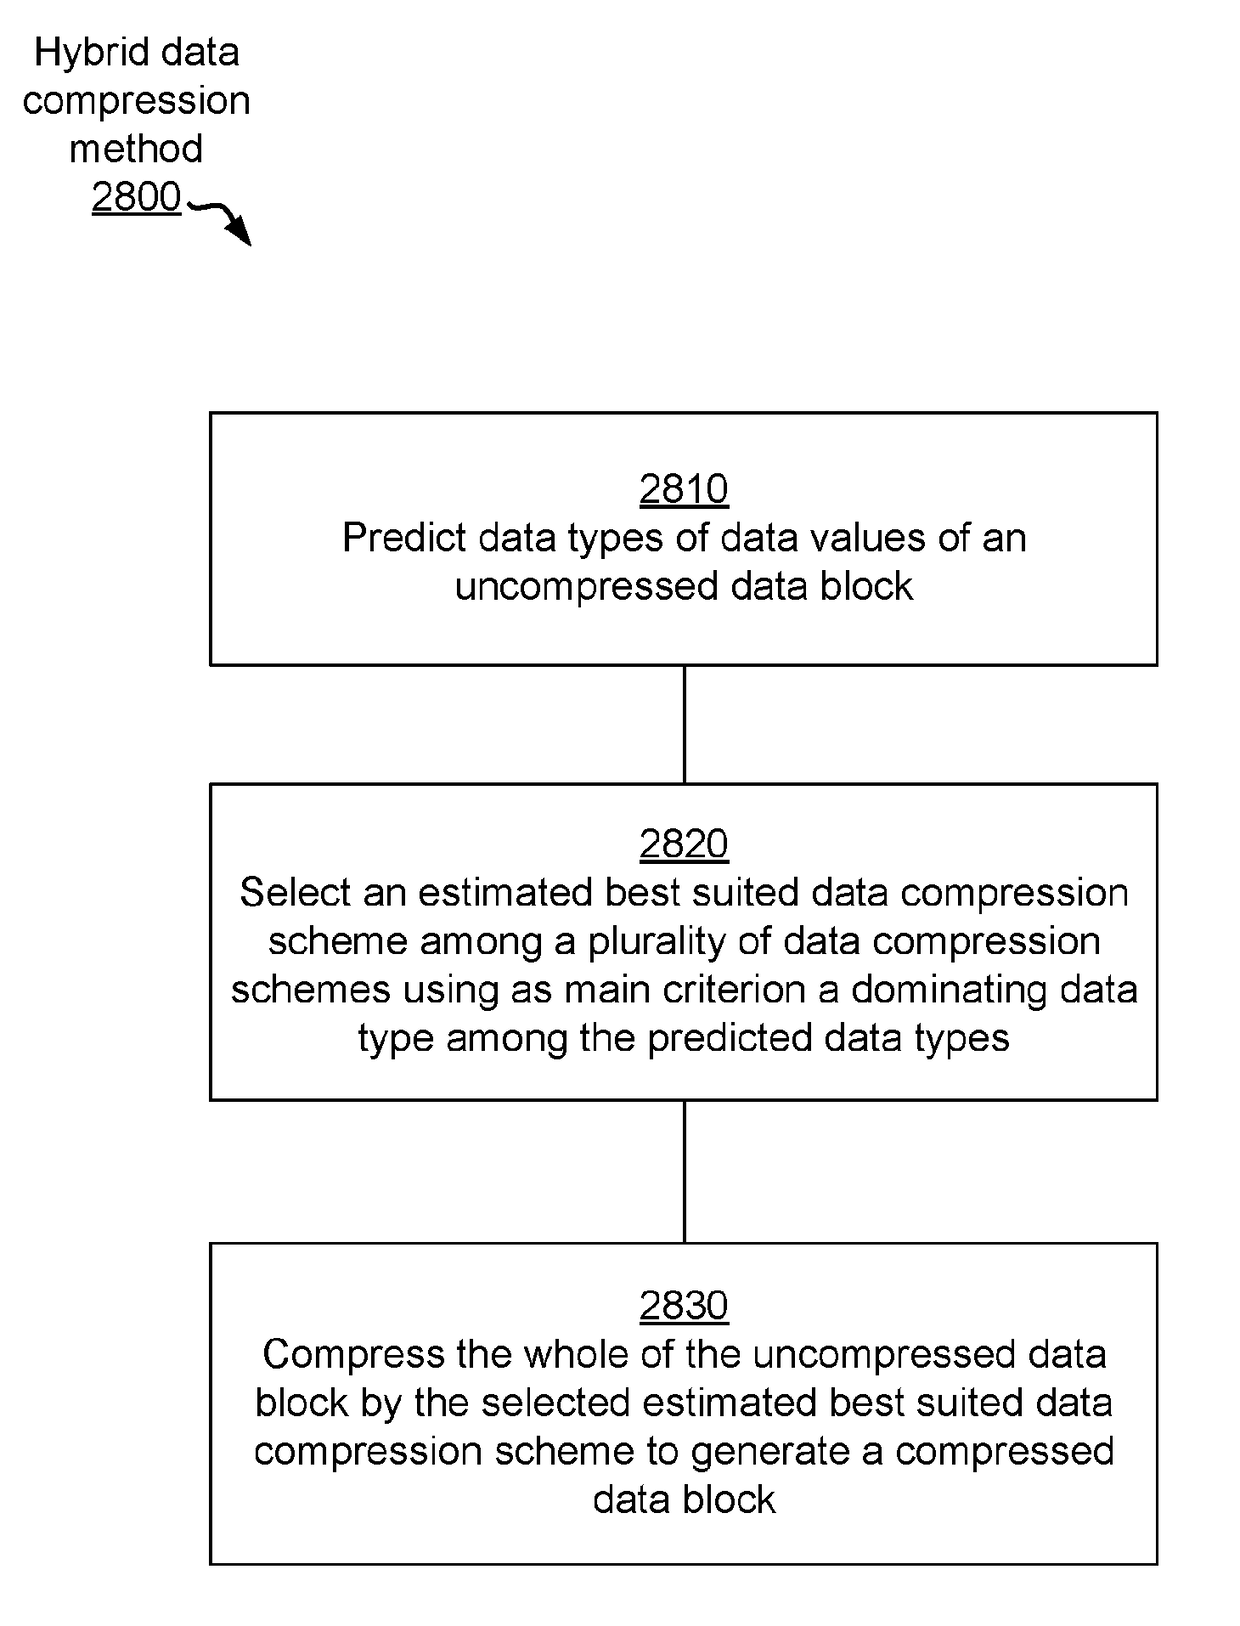 Methods, Devices and Systems for Hybrid Data Compression and Decompression